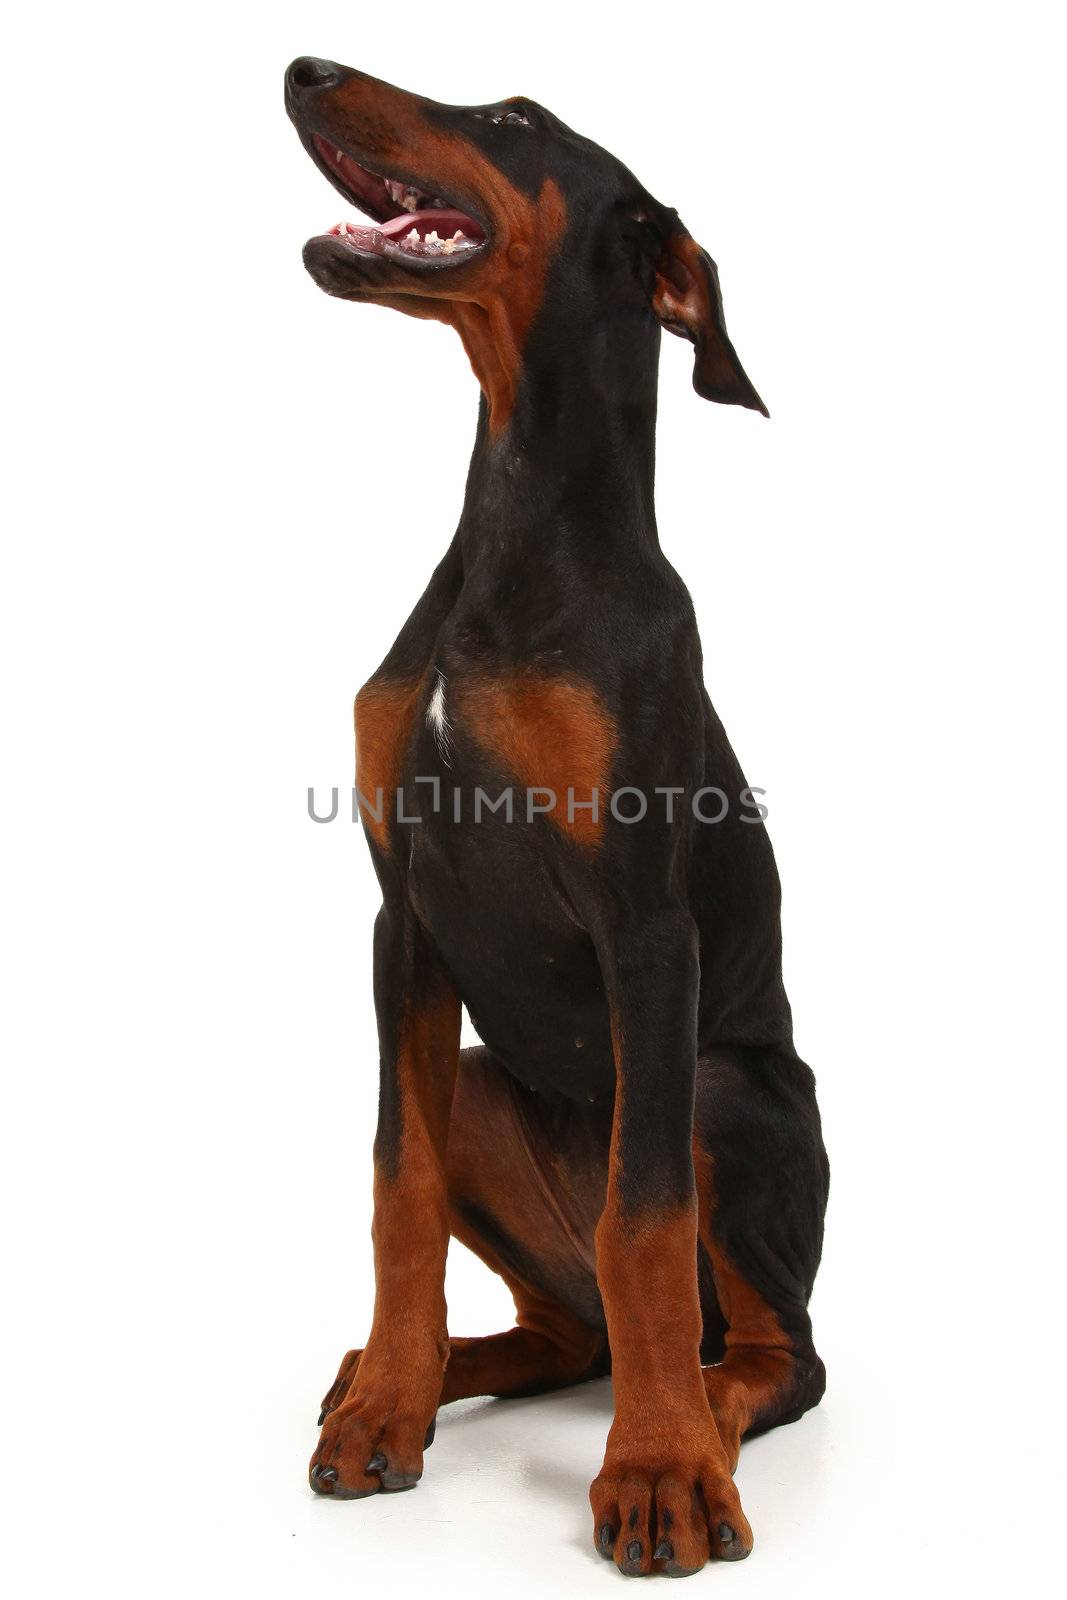 Doberman puppy sitting over white background looking up to side.